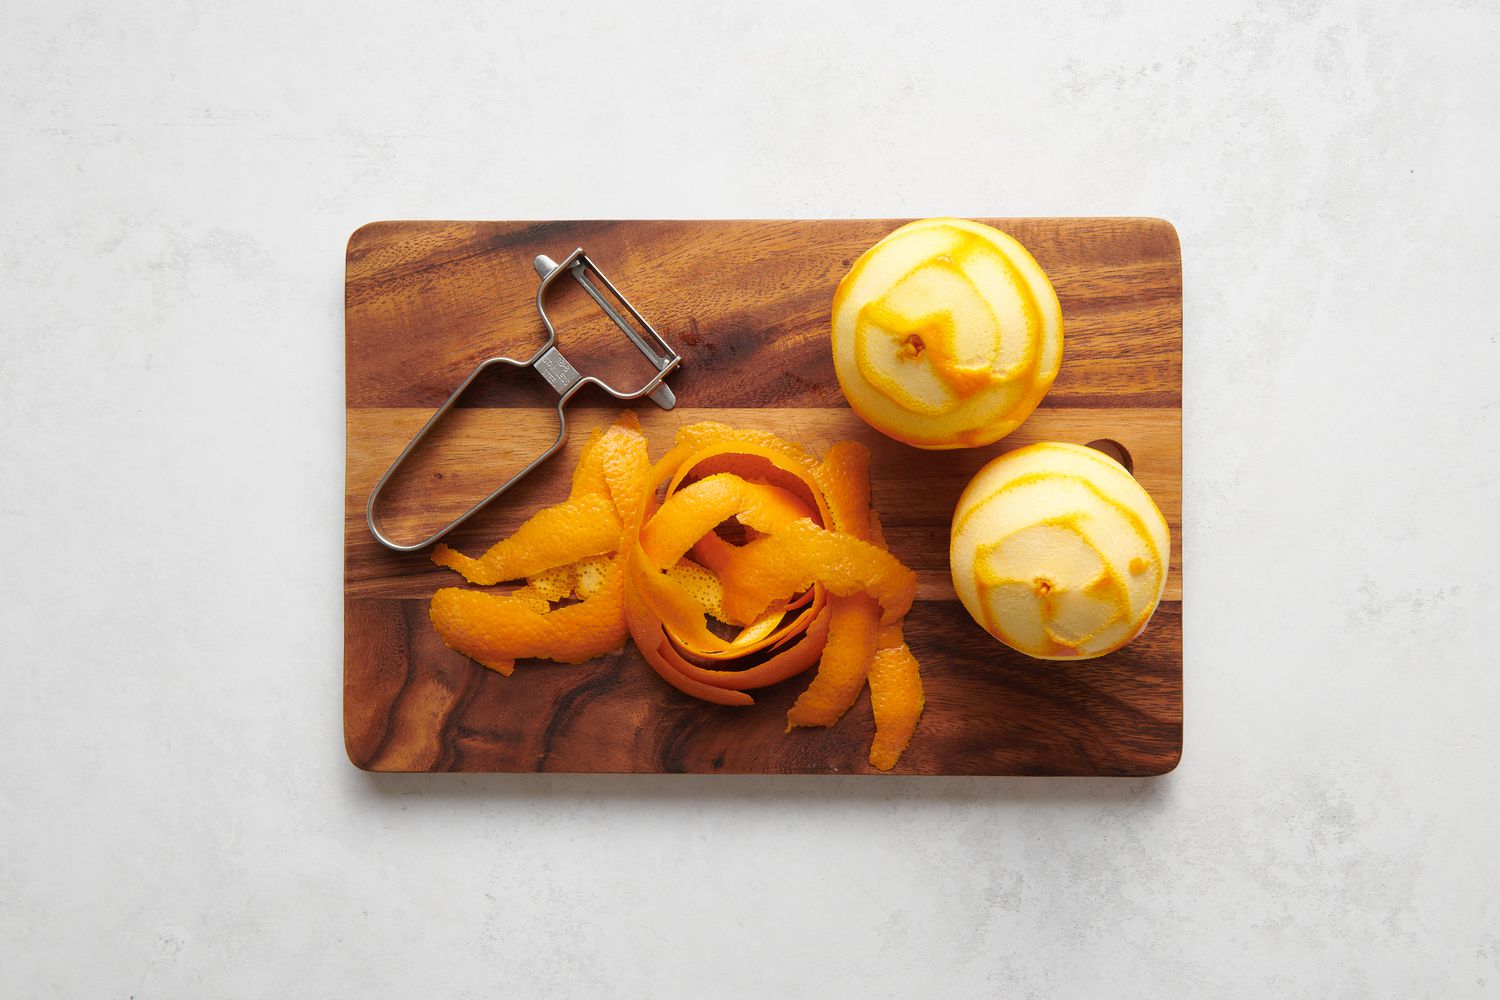 A cutting board with two peeled oranges, a peeler, and a pile of orange peels